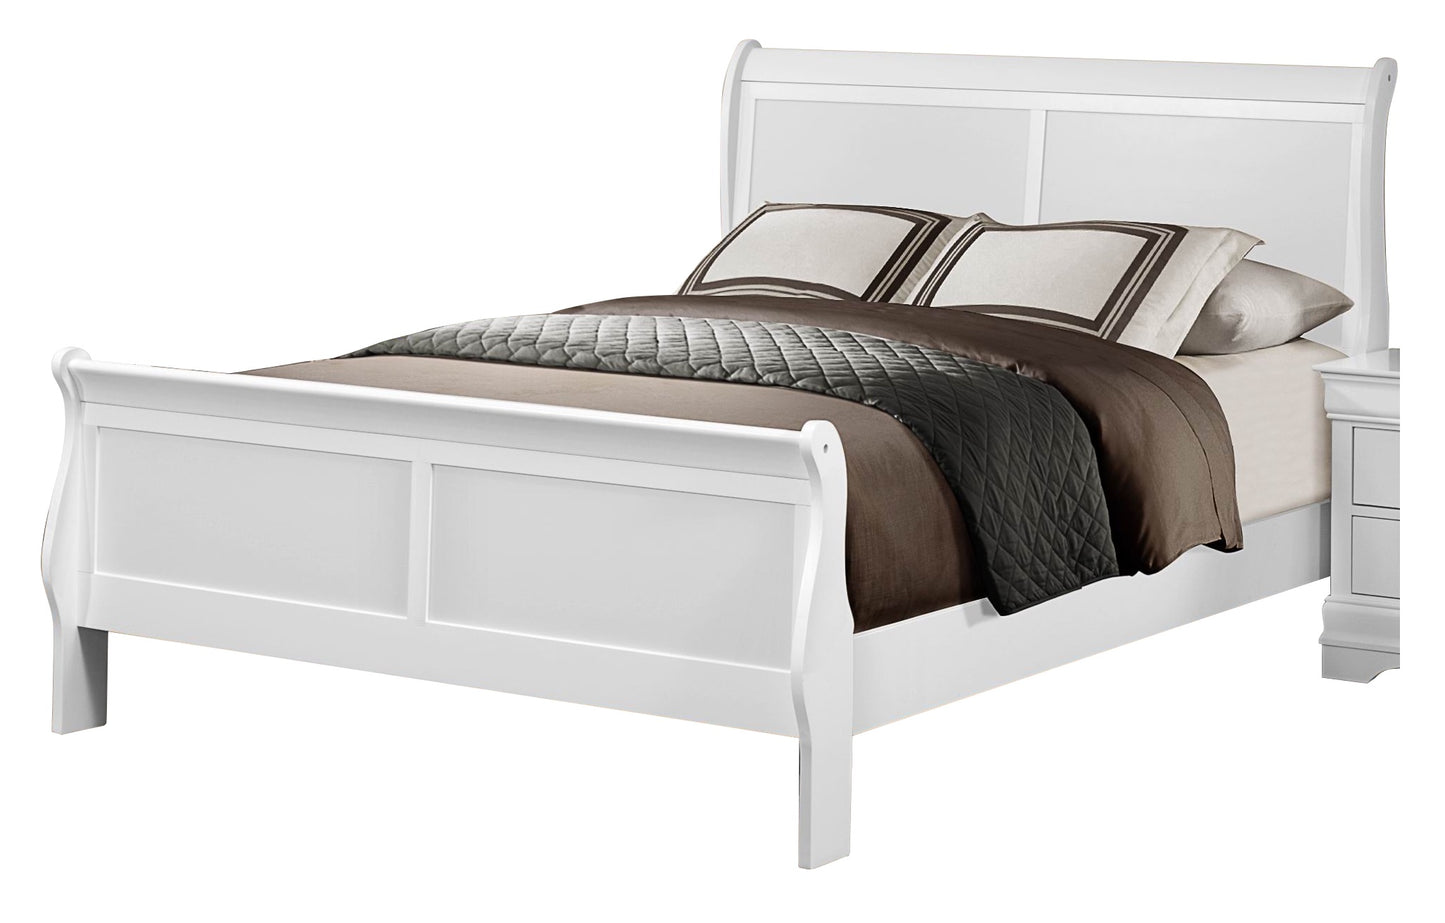 Manburg Louis Philippe 4PC Bedroom Set Cal King Sleigh Bed, Dresser, Mirror, Nightstand in Burnished White